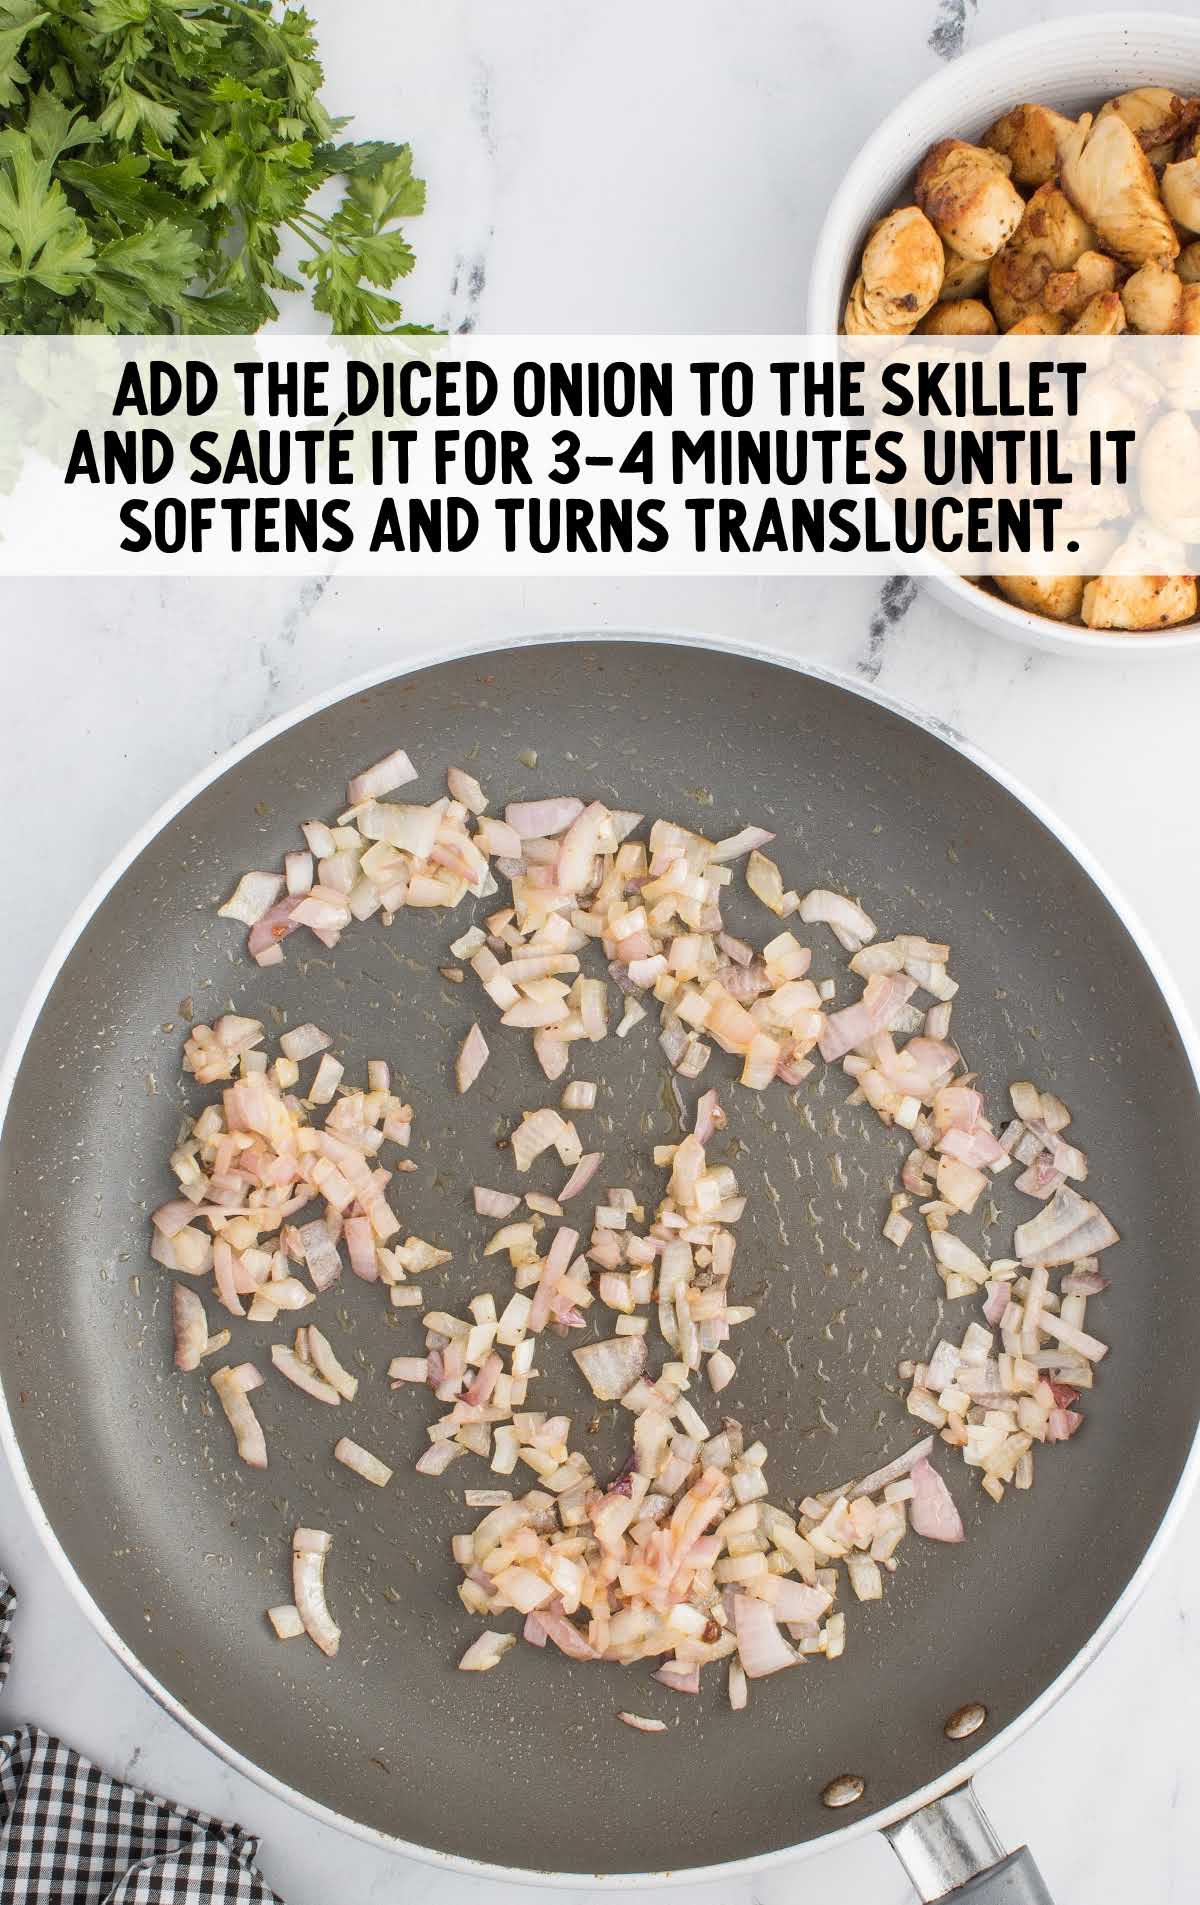 diced onion added to the skillet